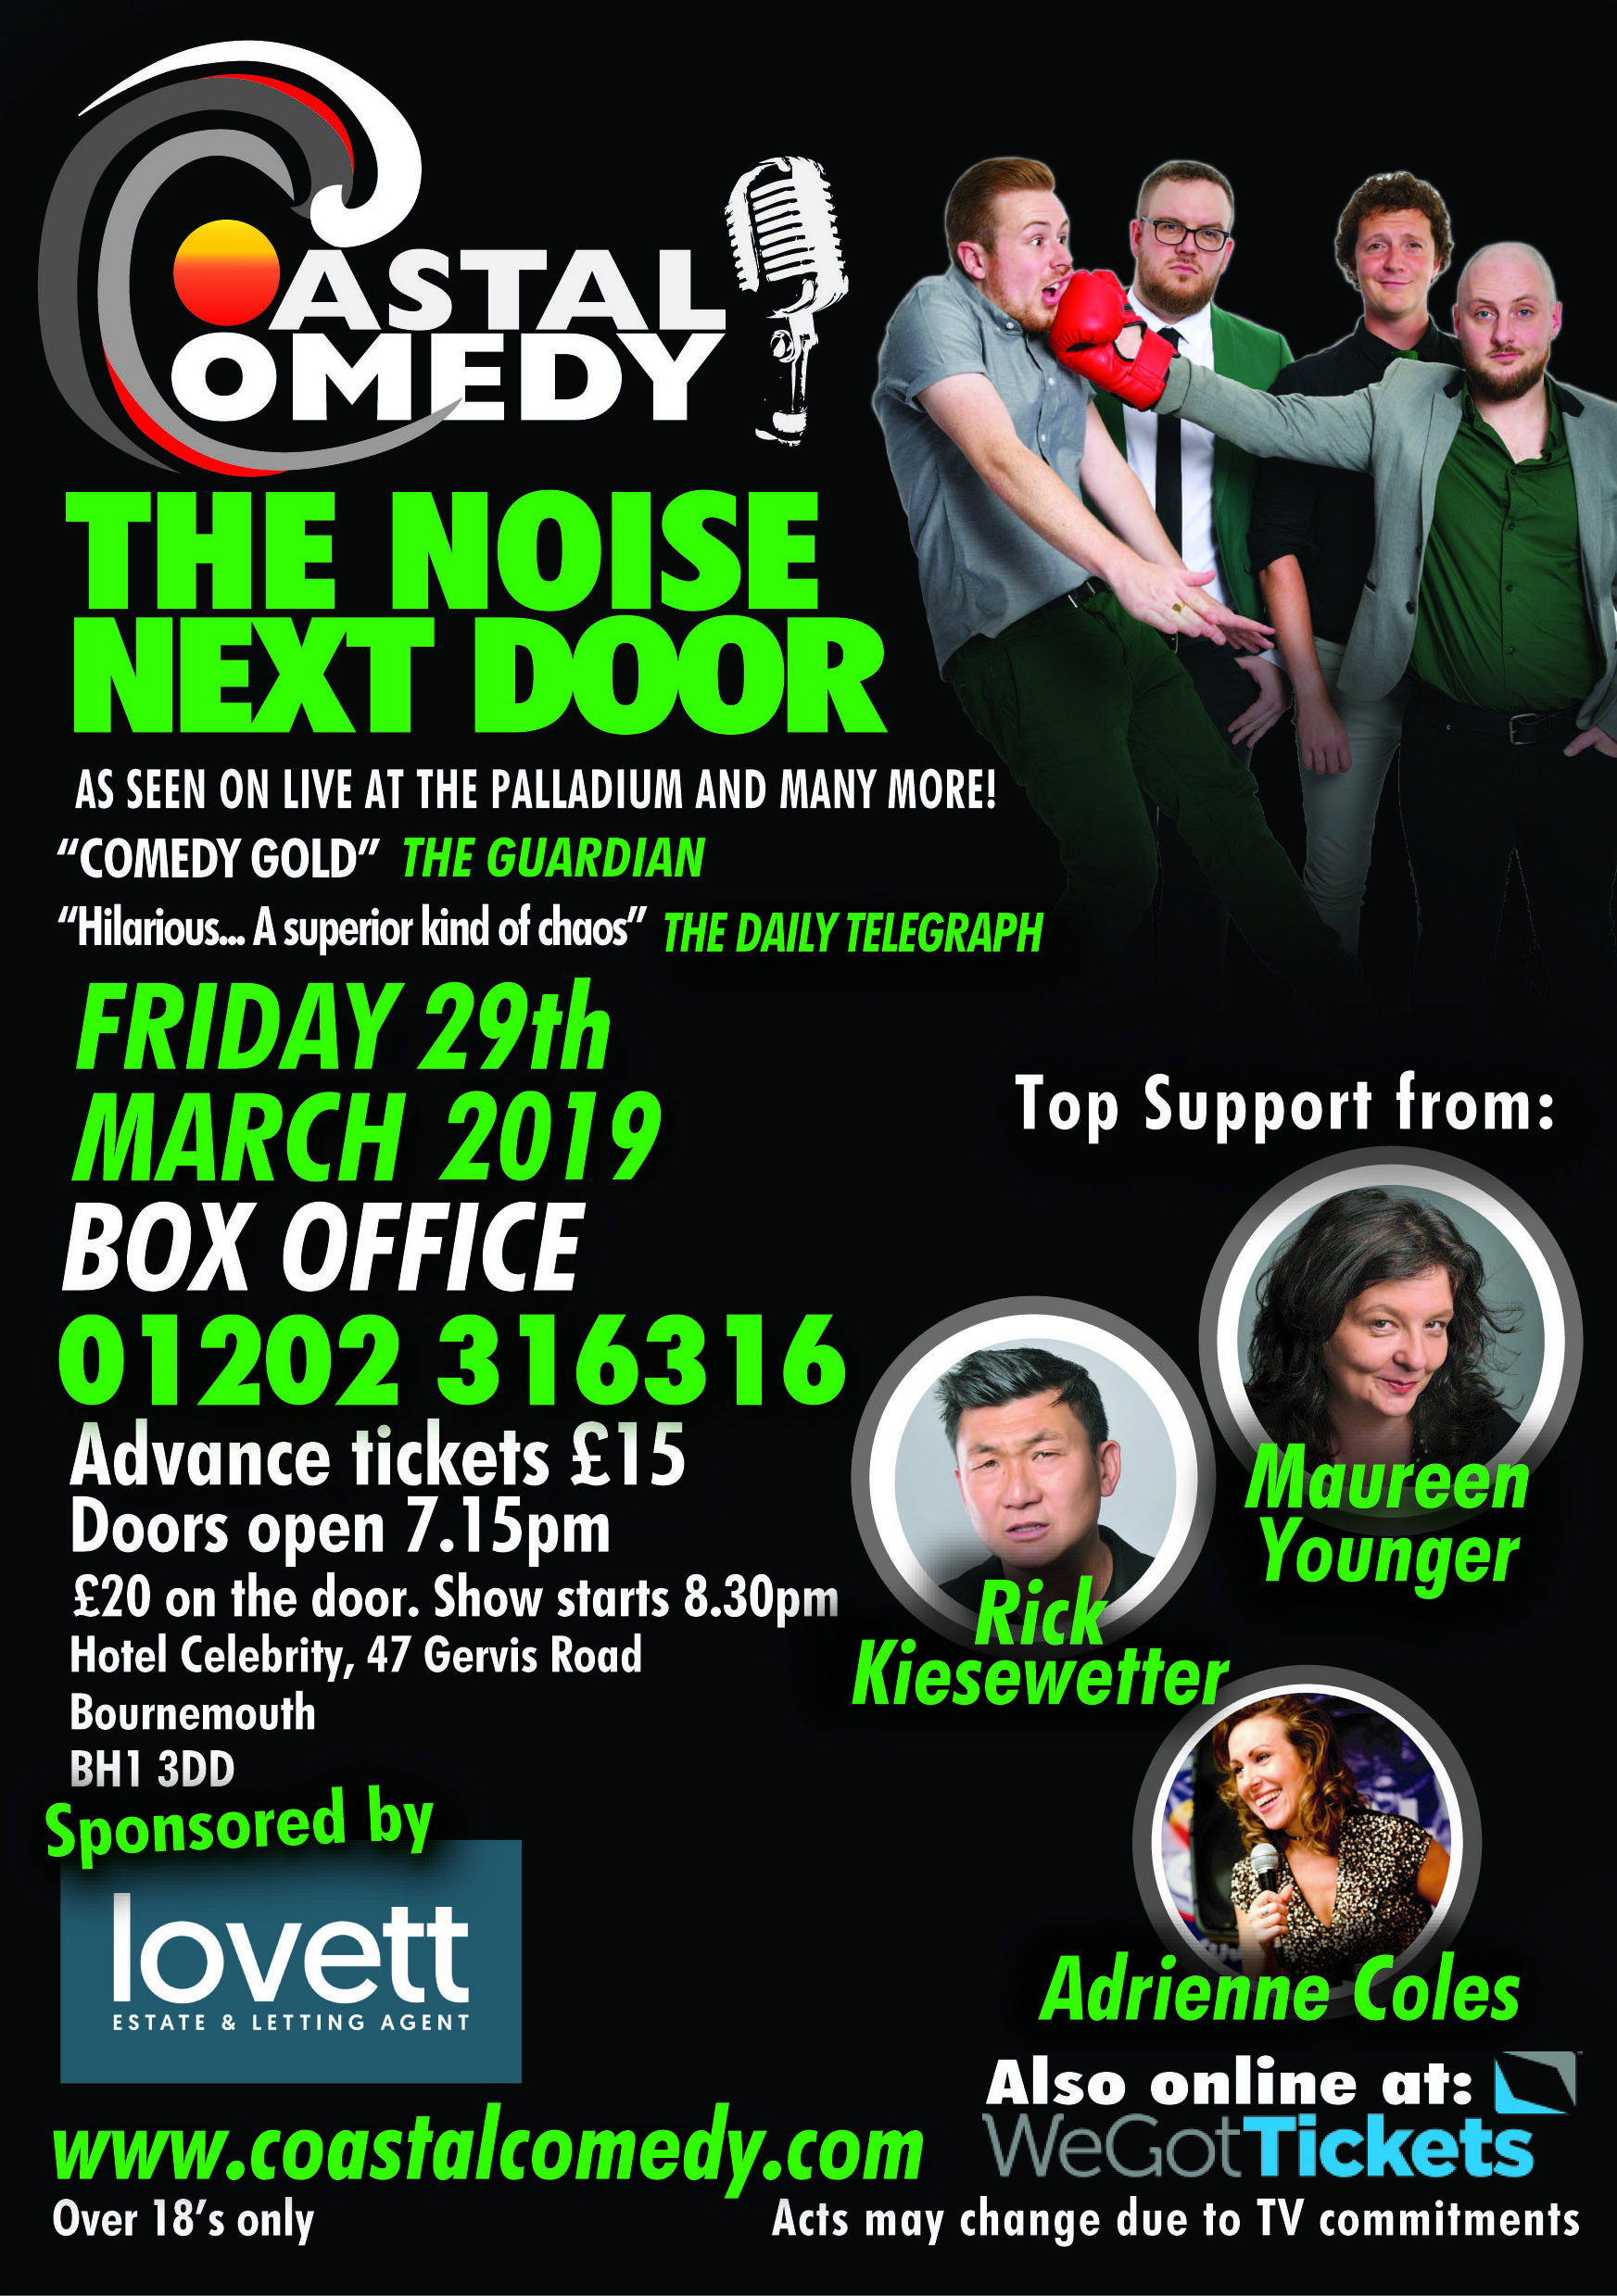 bournemouth, lol, standup, comedy, standup, hotel celebrity, bournemouth, dorset, whatson, funny, jokes, comedian, comic